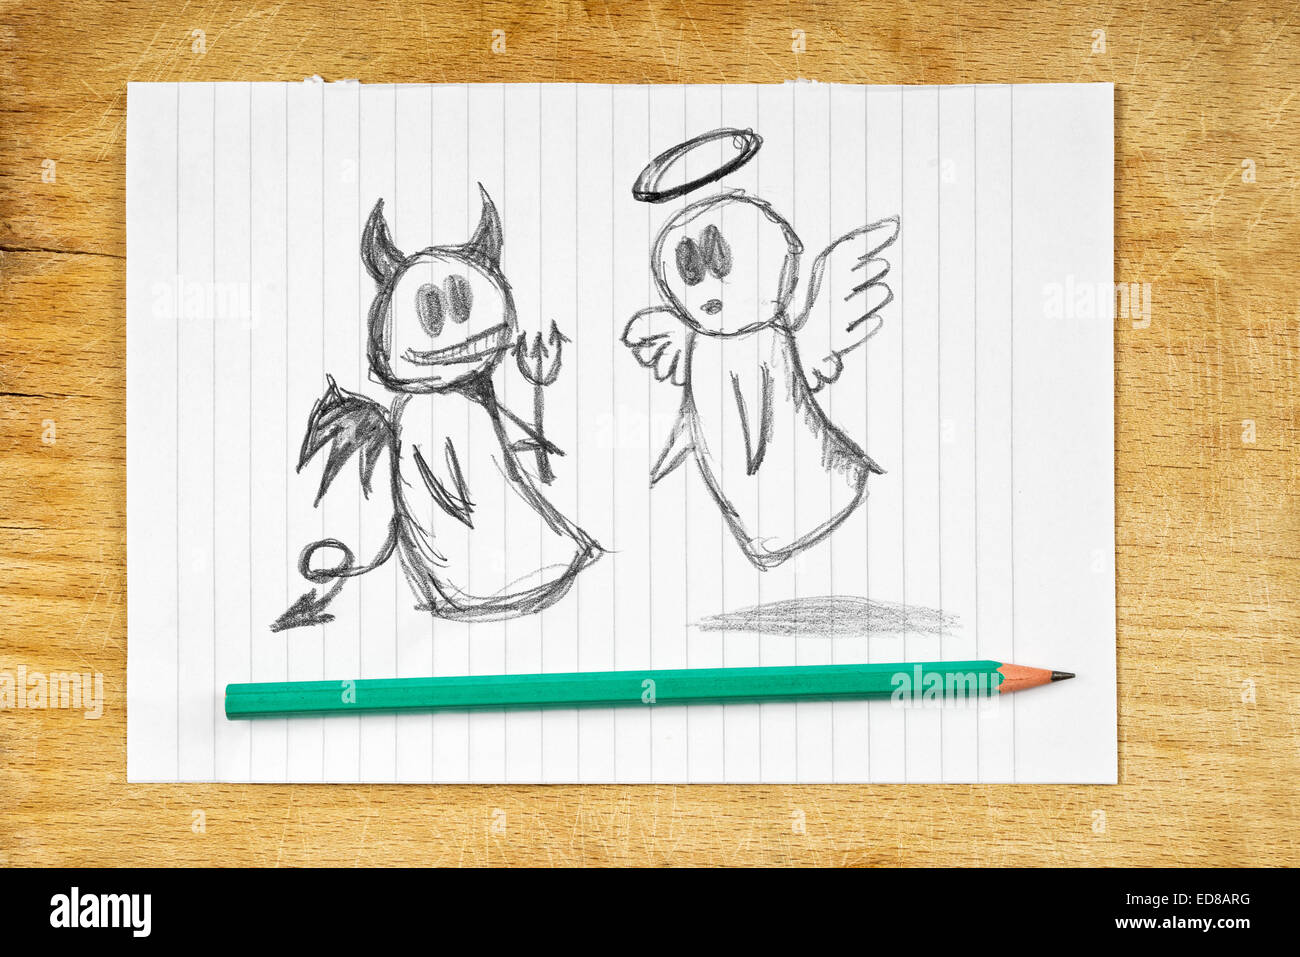 Doodle drawing of angel and devil on white paper as concept of conscience and moral dilemma in fight of good and evil. Stock Photo